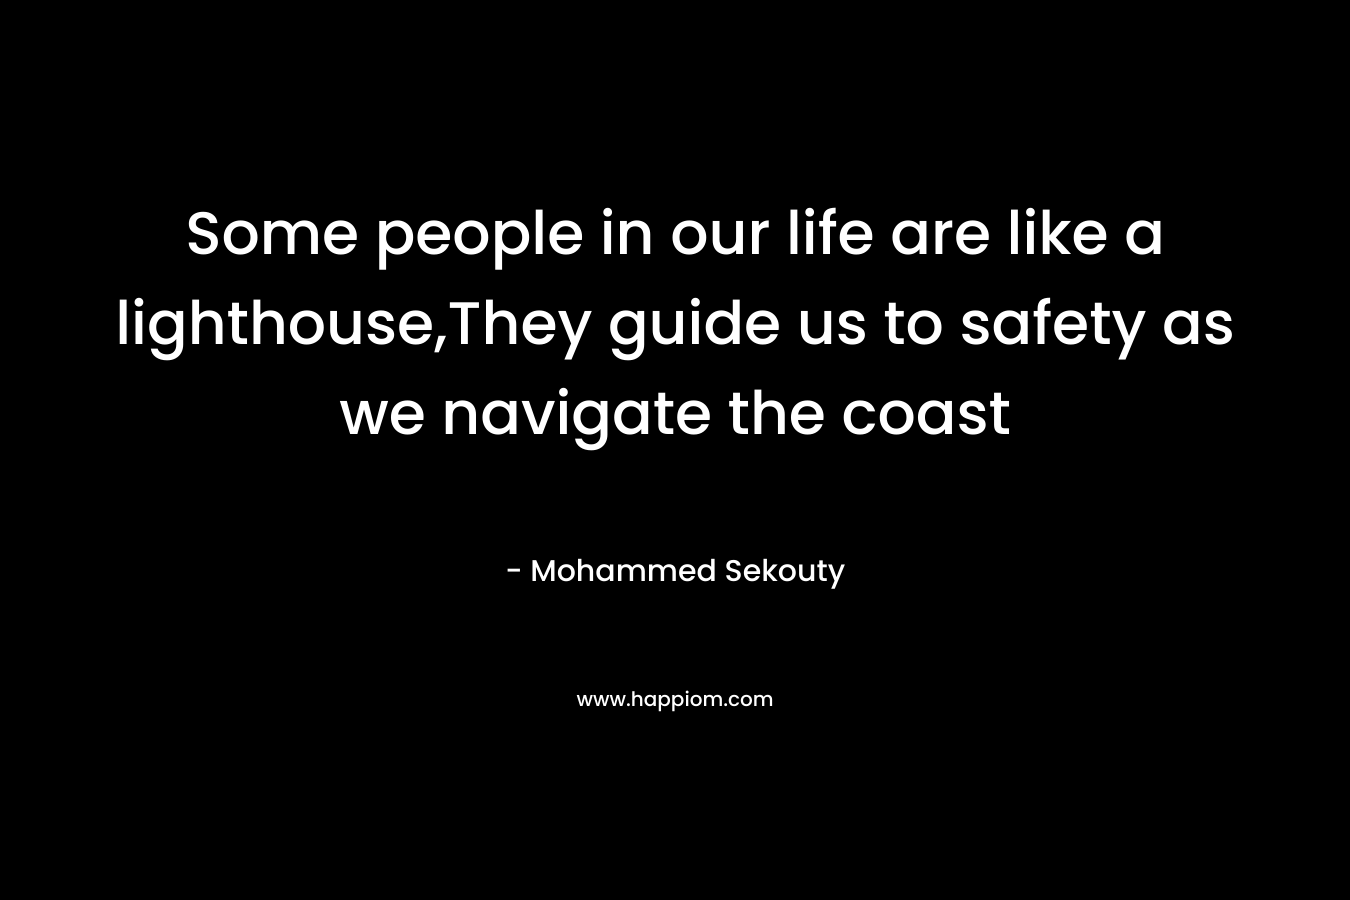 Some people in our life are like a lighthouse,They guide us to safety as we navigate the coast